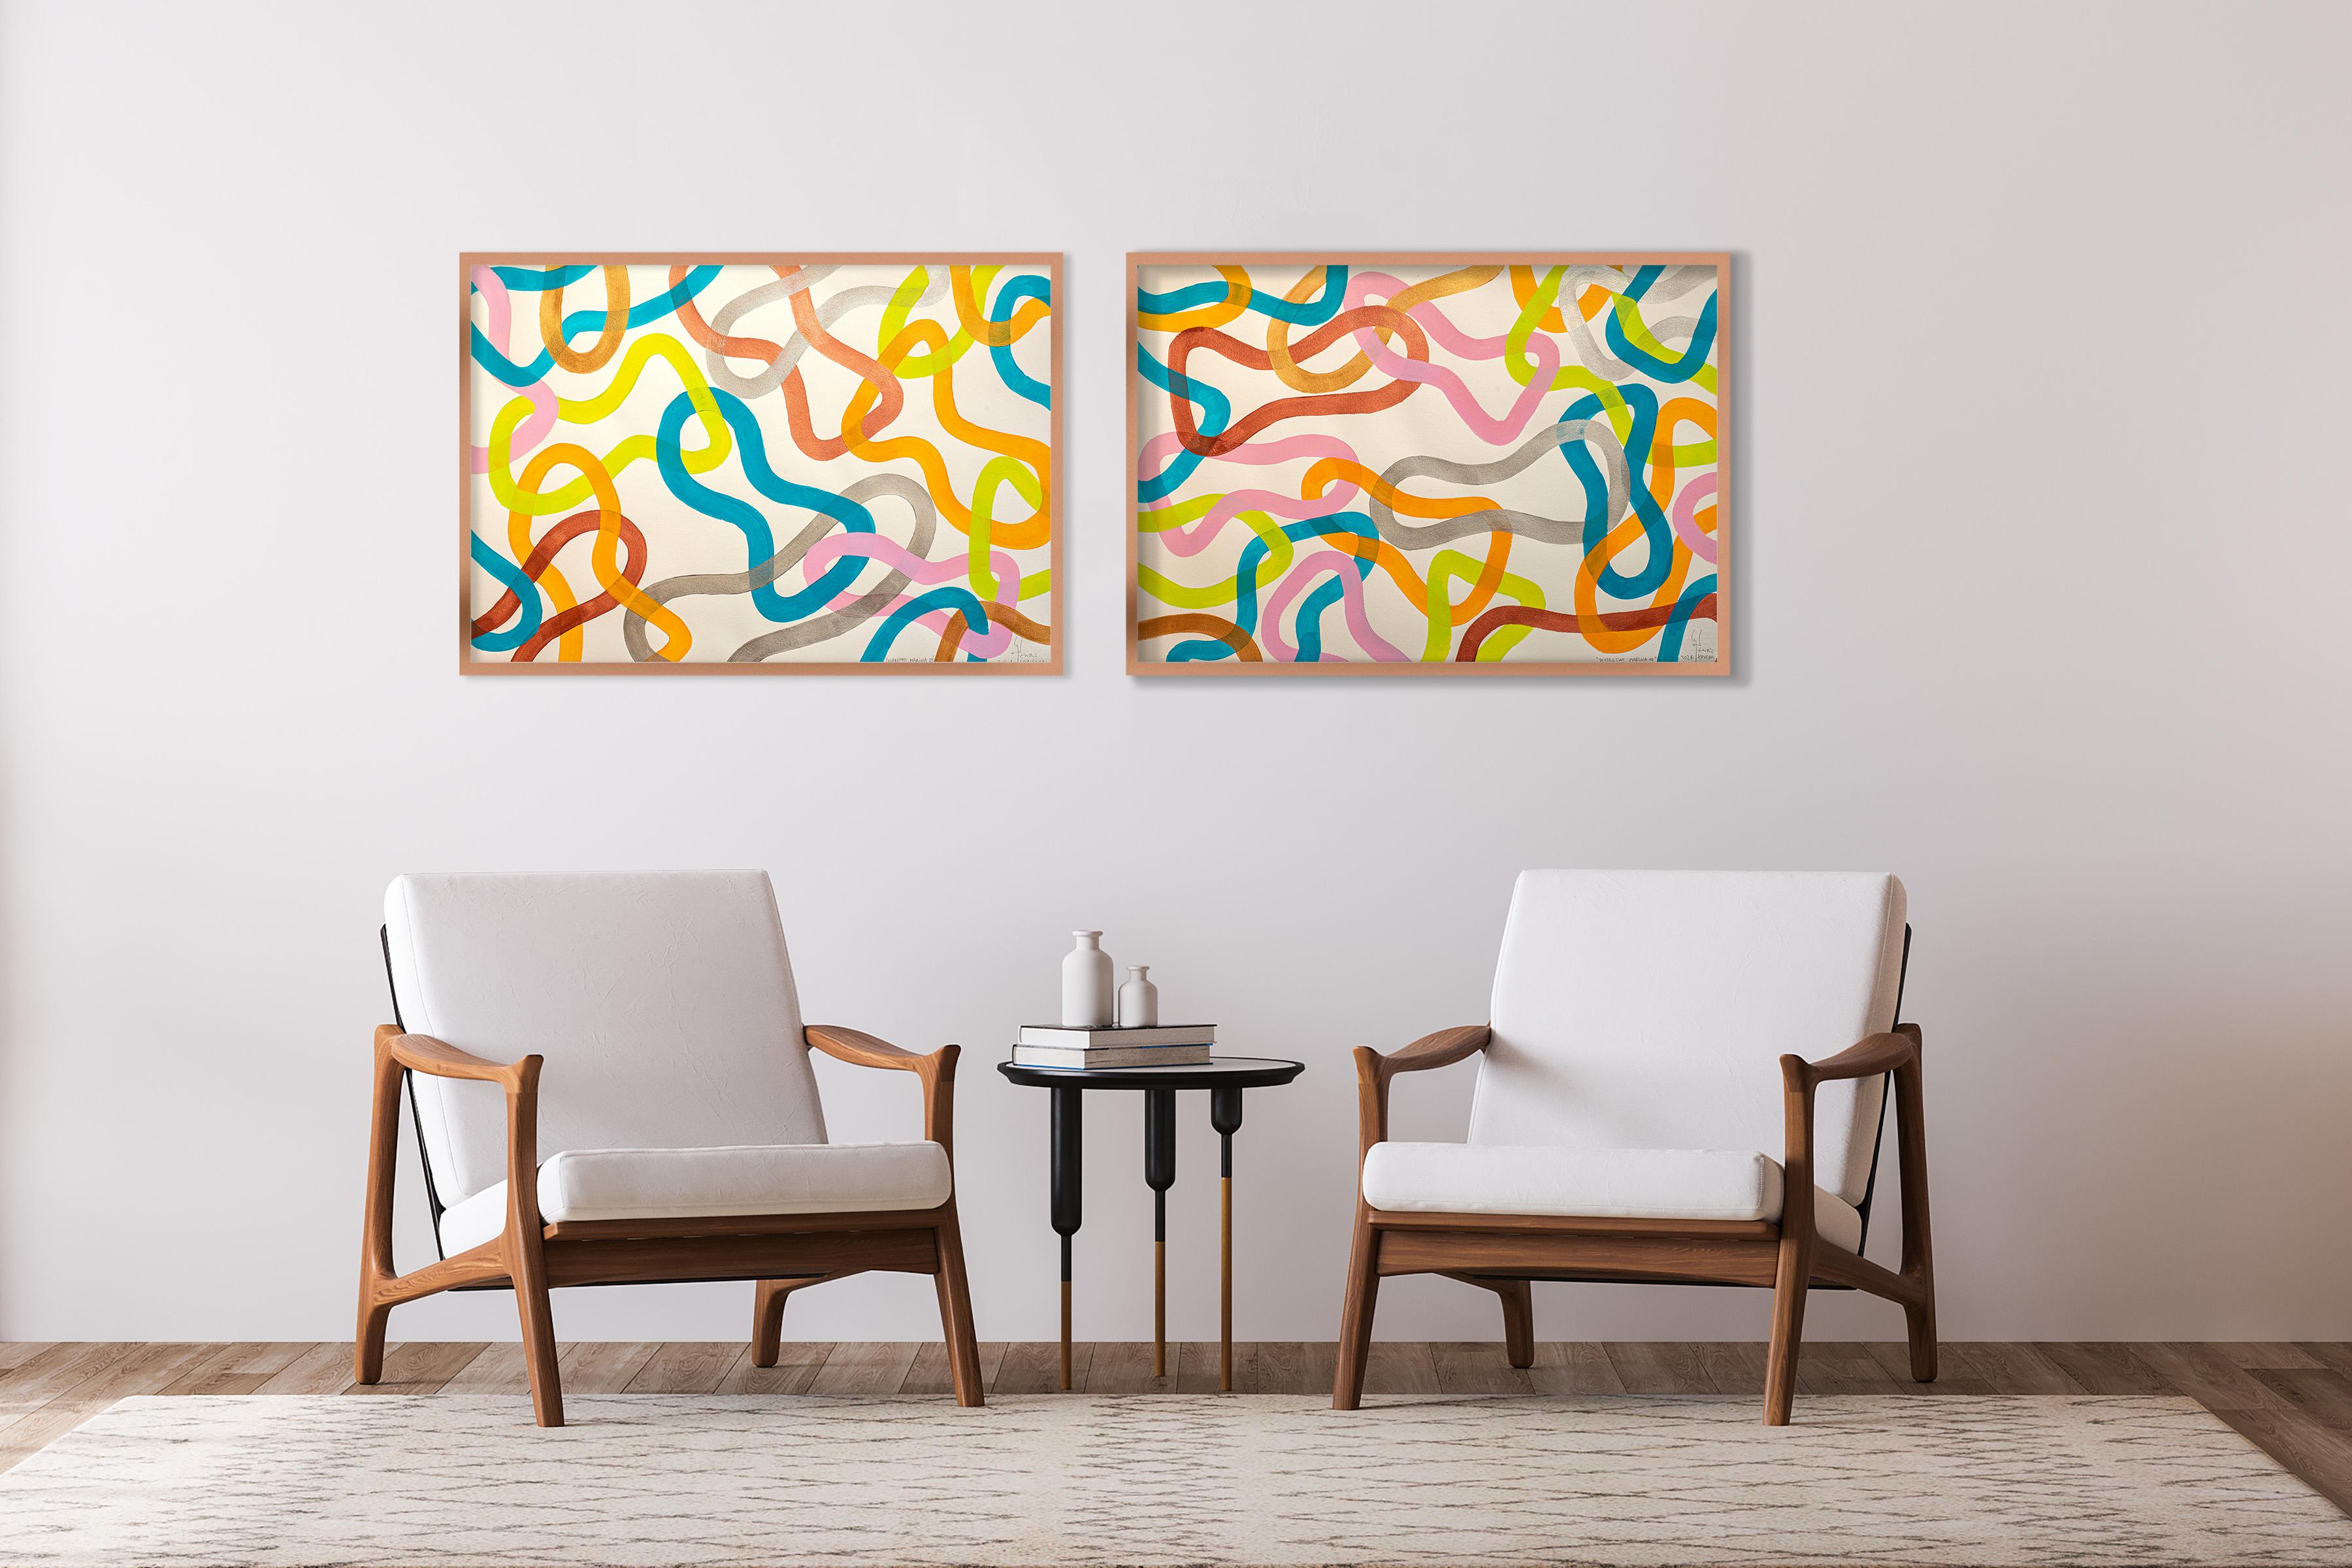 Marine Diversity Diptych, Abstract Colourful Fish Patterns, Vivid Tones Gestures - Painting by Enric Servera